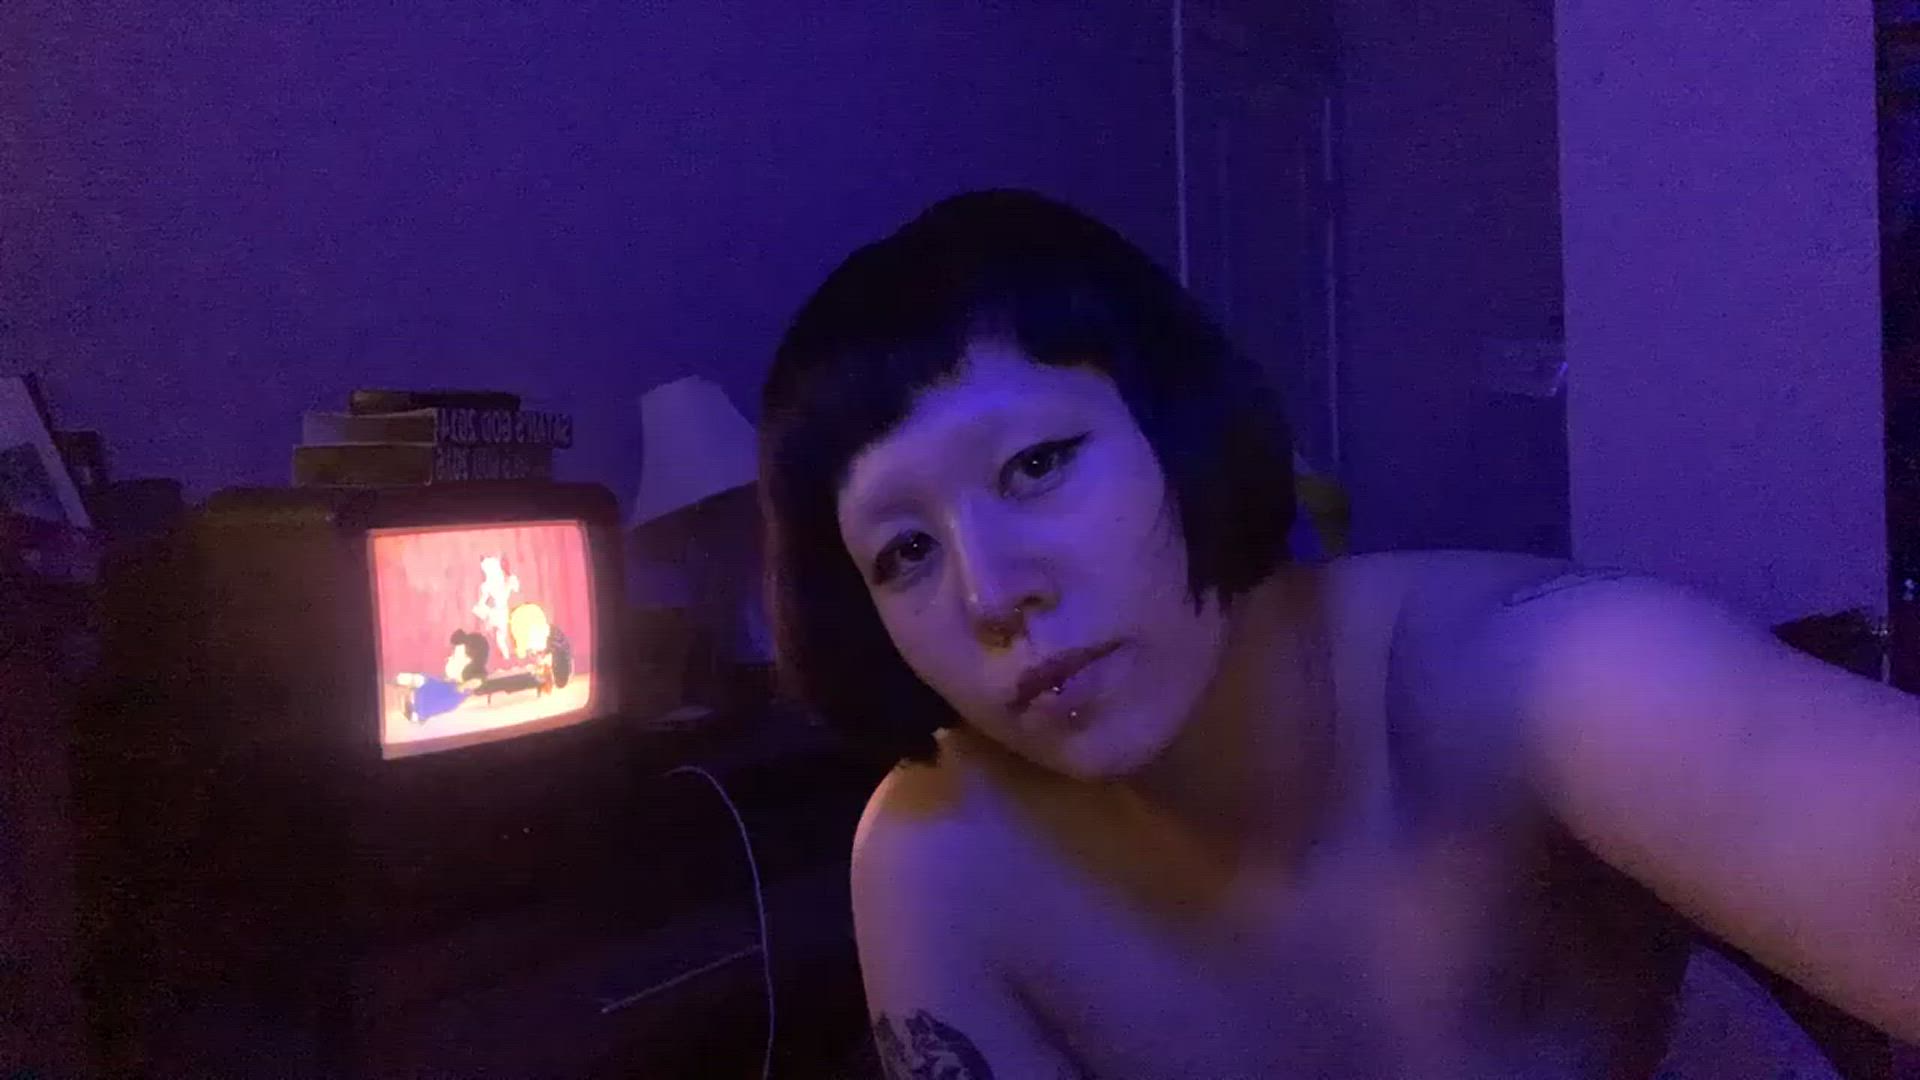 Tits porn video with onlyfans model annetteclaricedarby <strong>@annetteclaricedarby</strong>